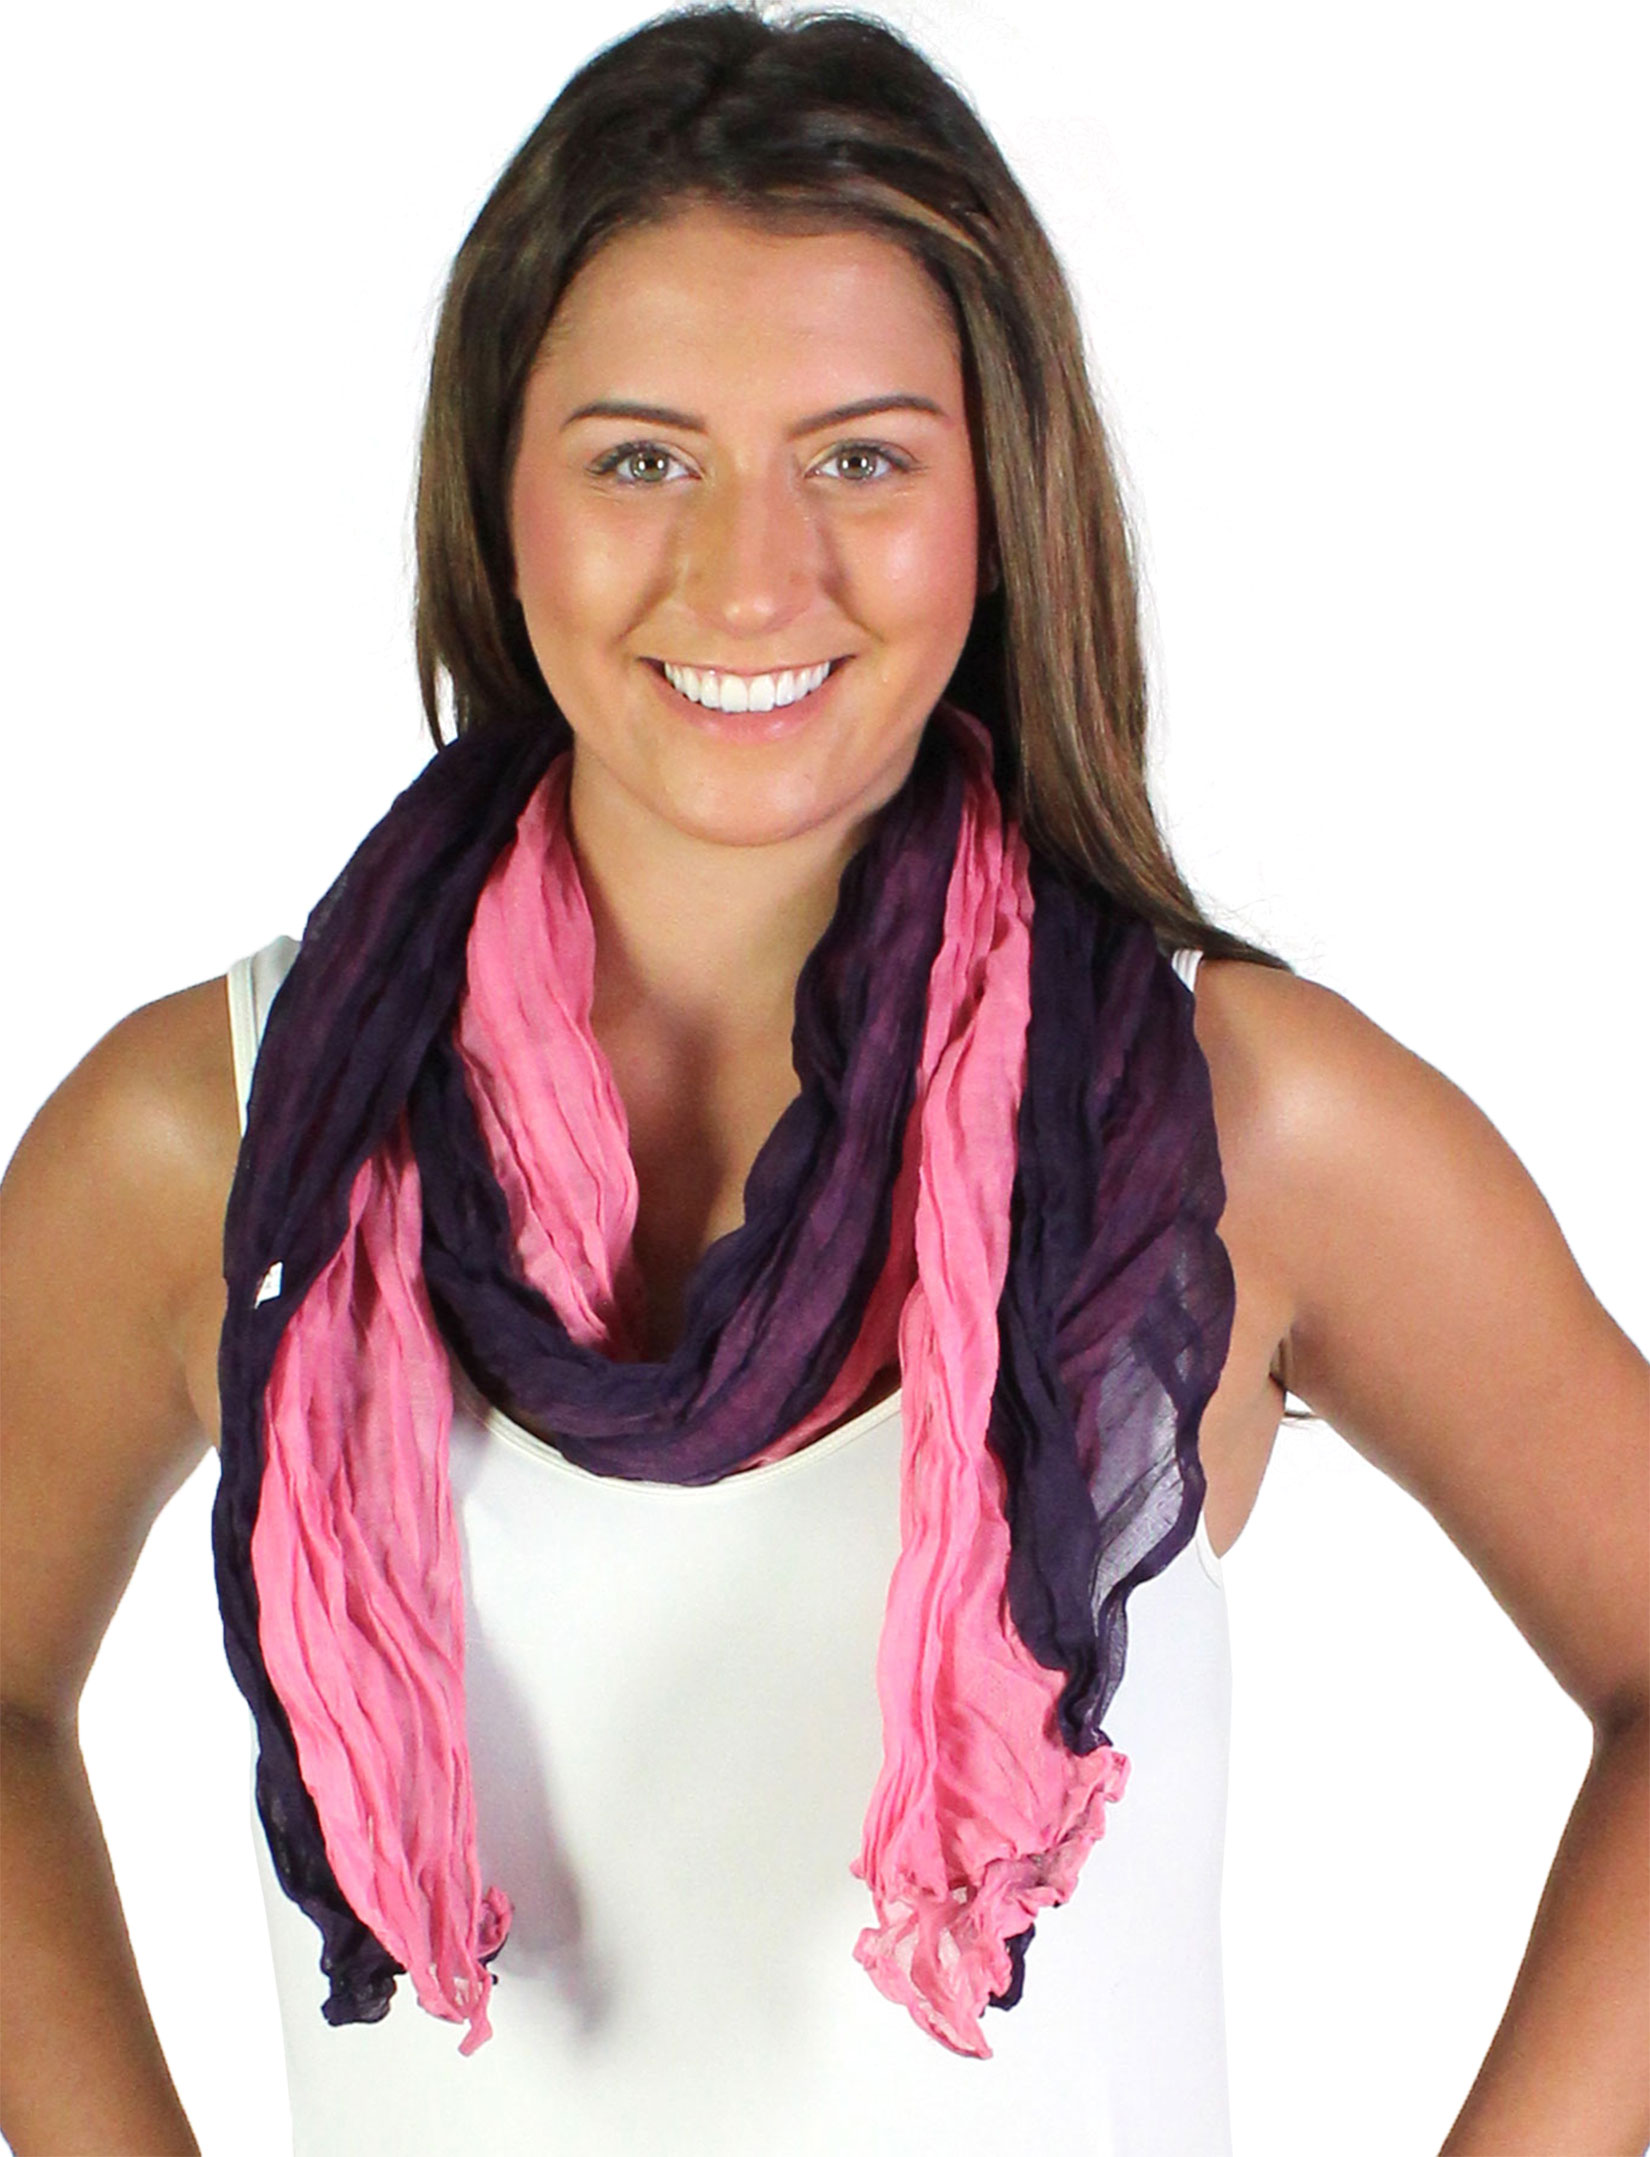 Oblong Scarves - Two-Tone Crinkle 908081*